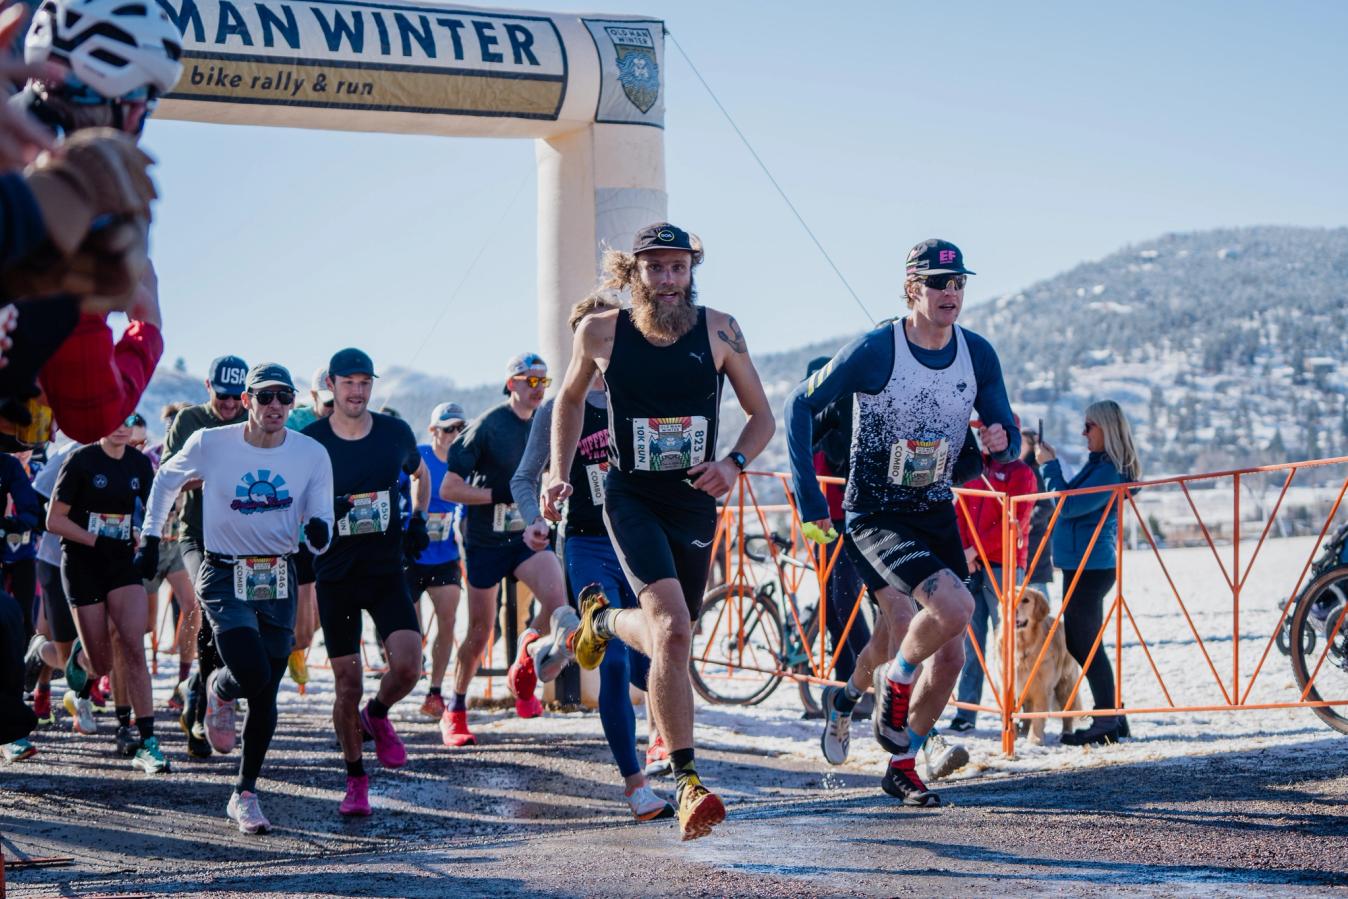 Old Man Winter Rally also pairs a 10km running race with the cycling event 